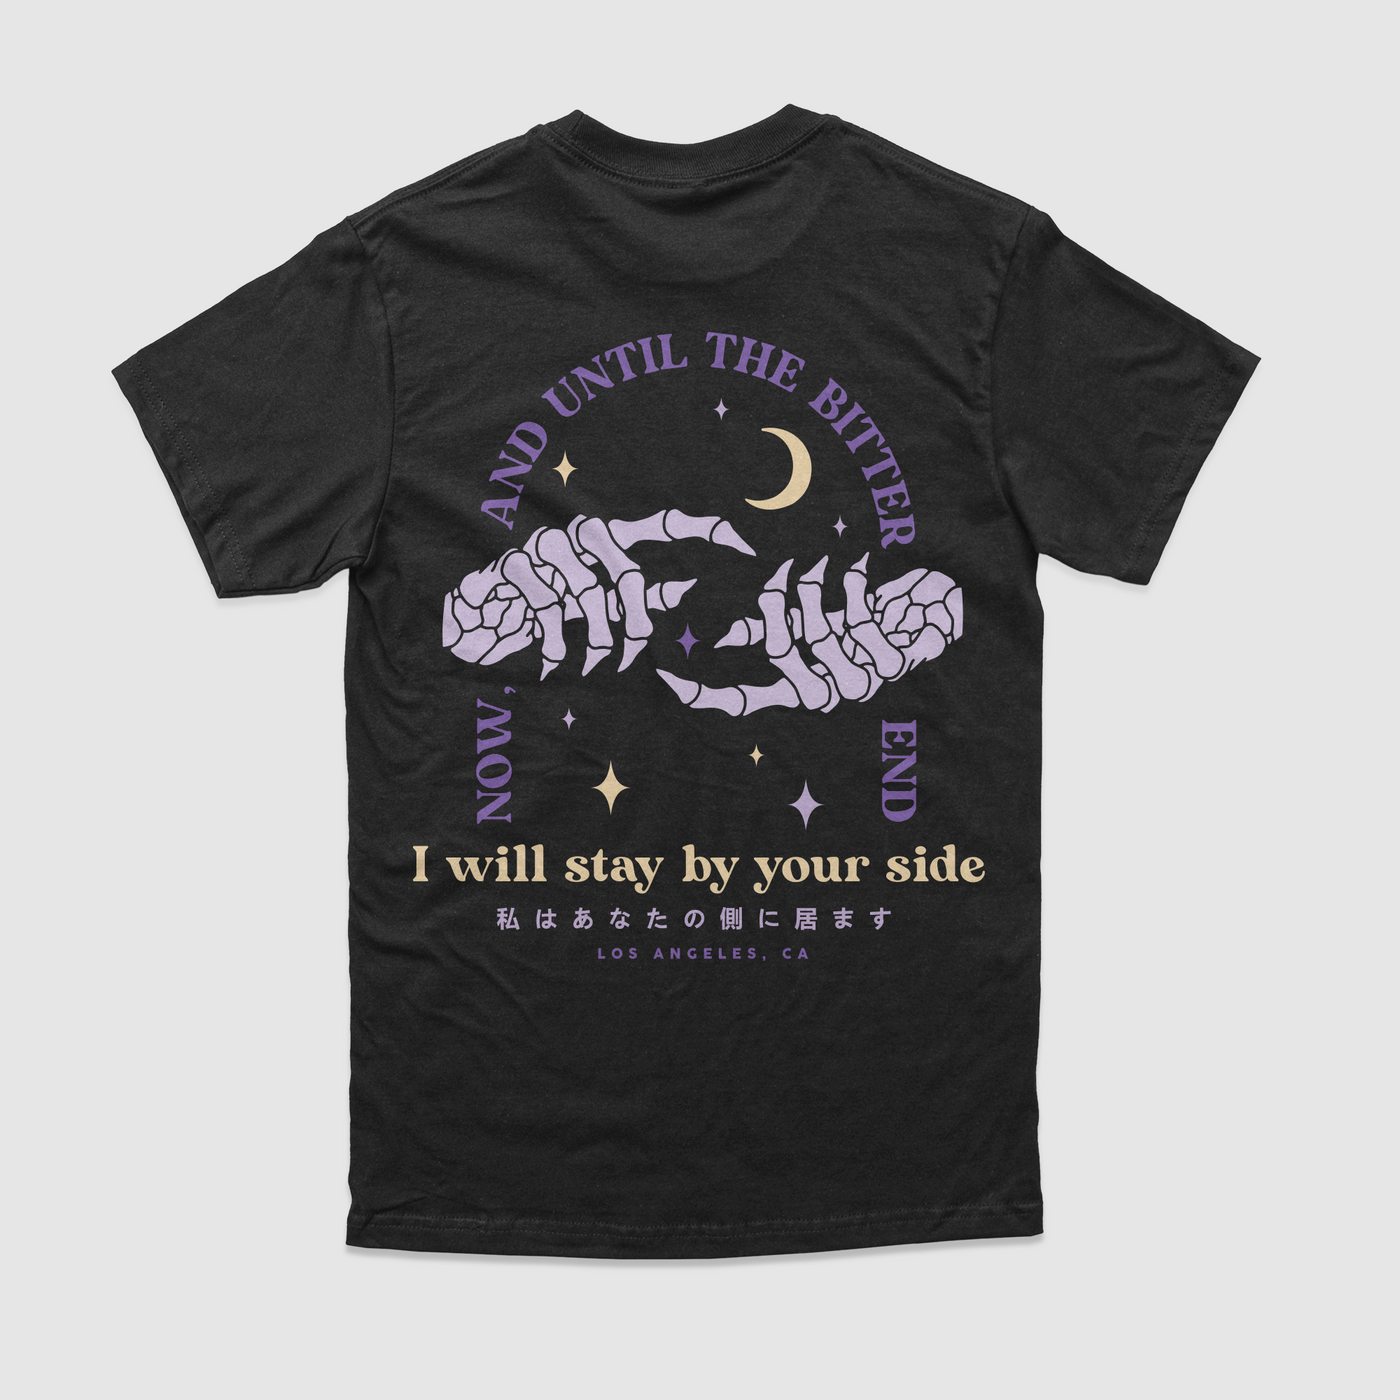 I Will Stay By Your Side TeeIntroducing "I Will Stay By Your Side," a design that beautifully captures the emotions of Separation Anxiety, Fear, and Comfort. This message serves as a source of DREAM Clothing 